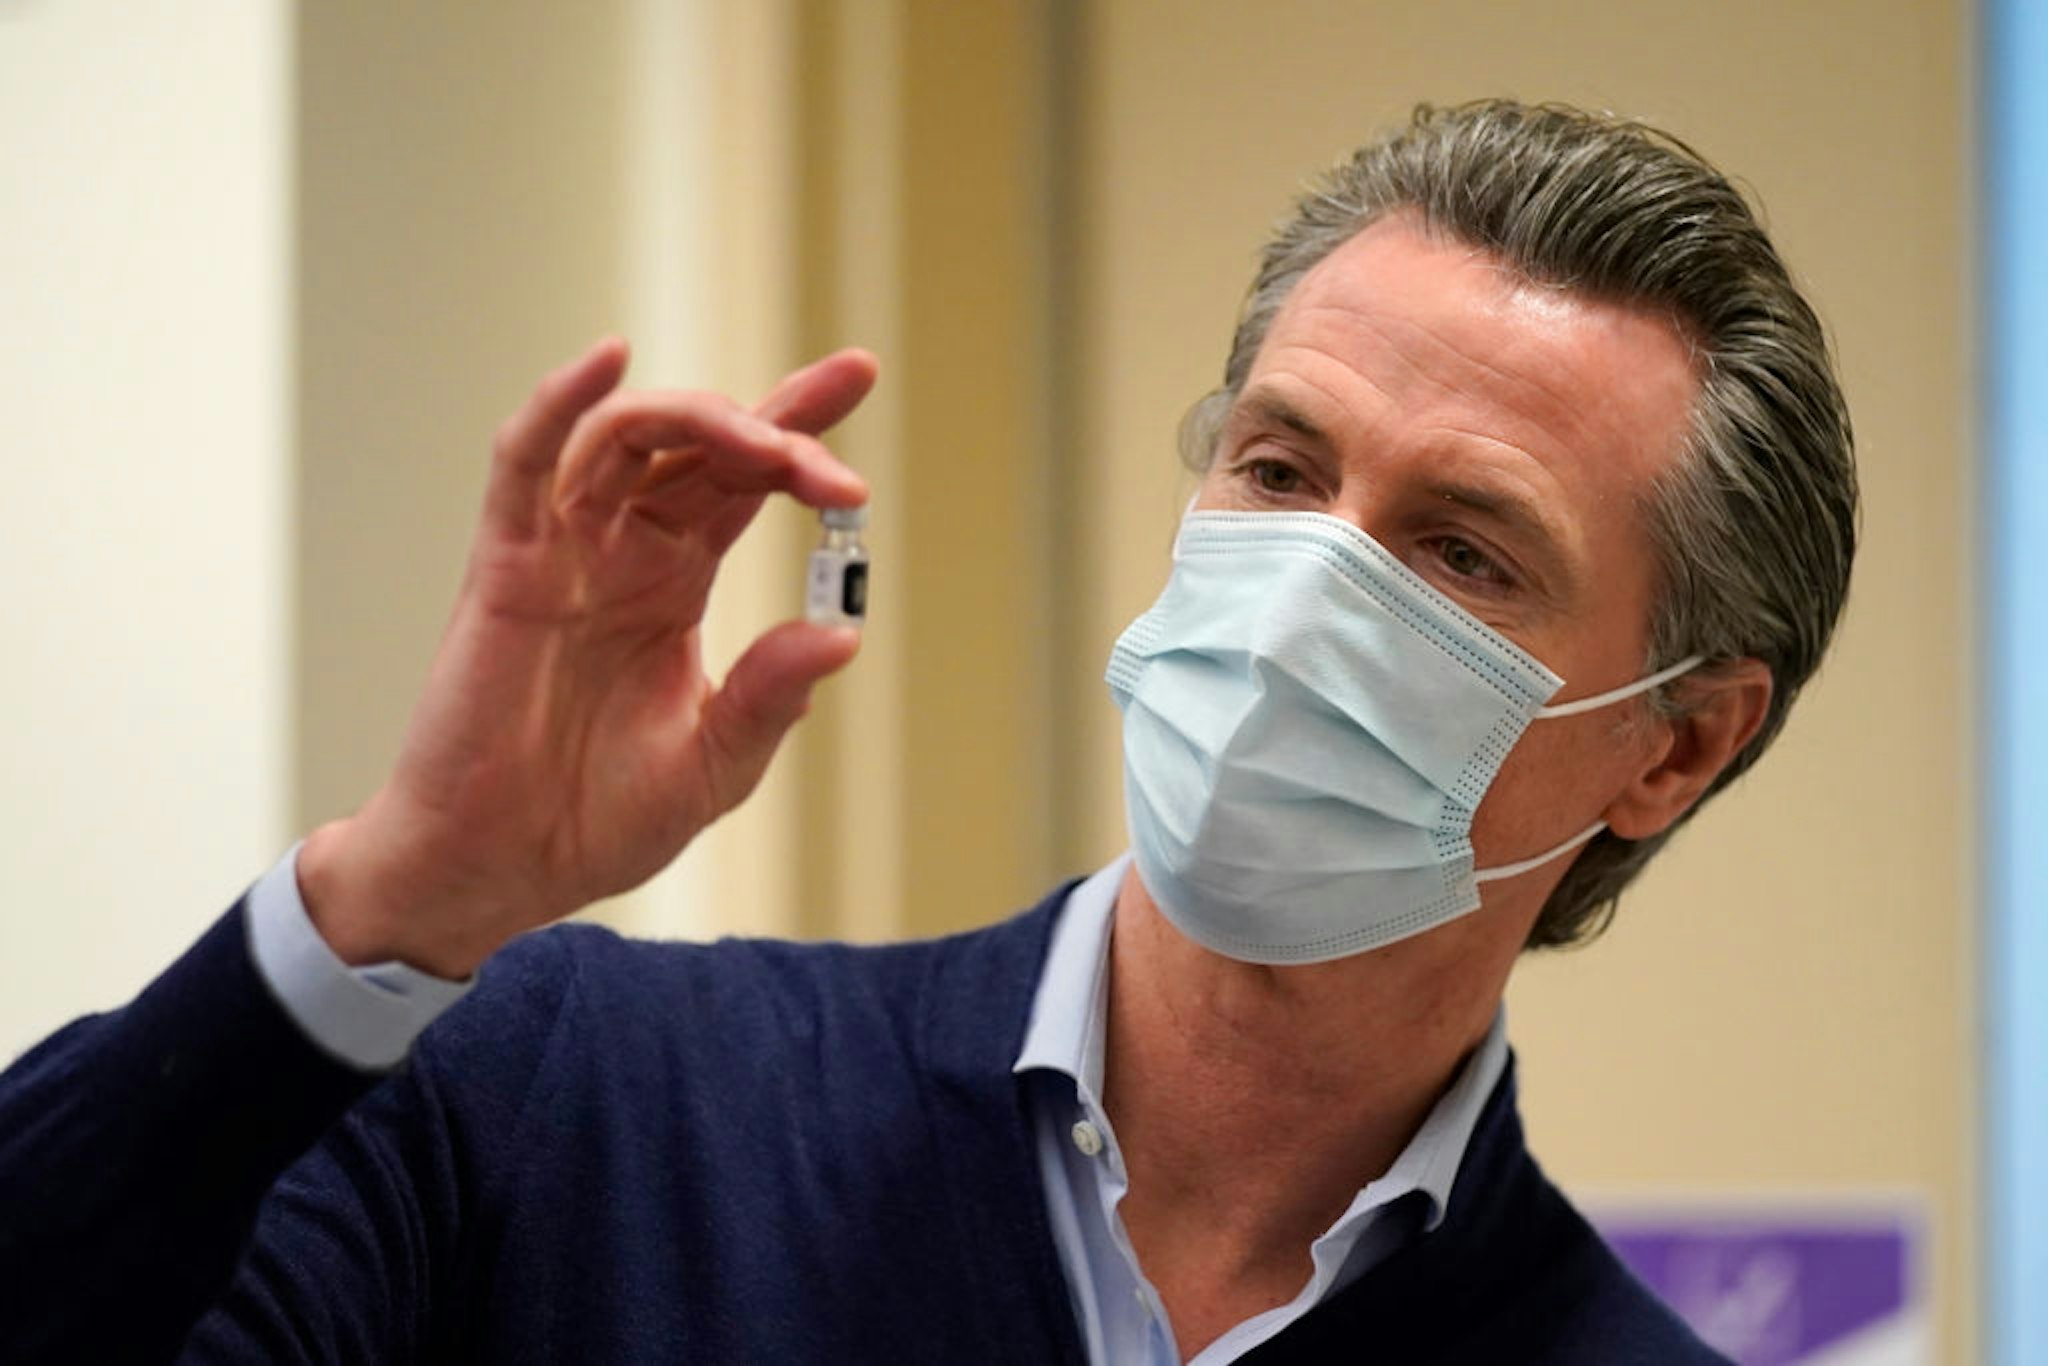 Gov. Gavin Newsom holds up a vial of the Pfizer-BioNTech COVID-19 vaccine at Kaiser Permanente Los Angeles Medical Center on December 14, 2020 in Los Angeles, California.